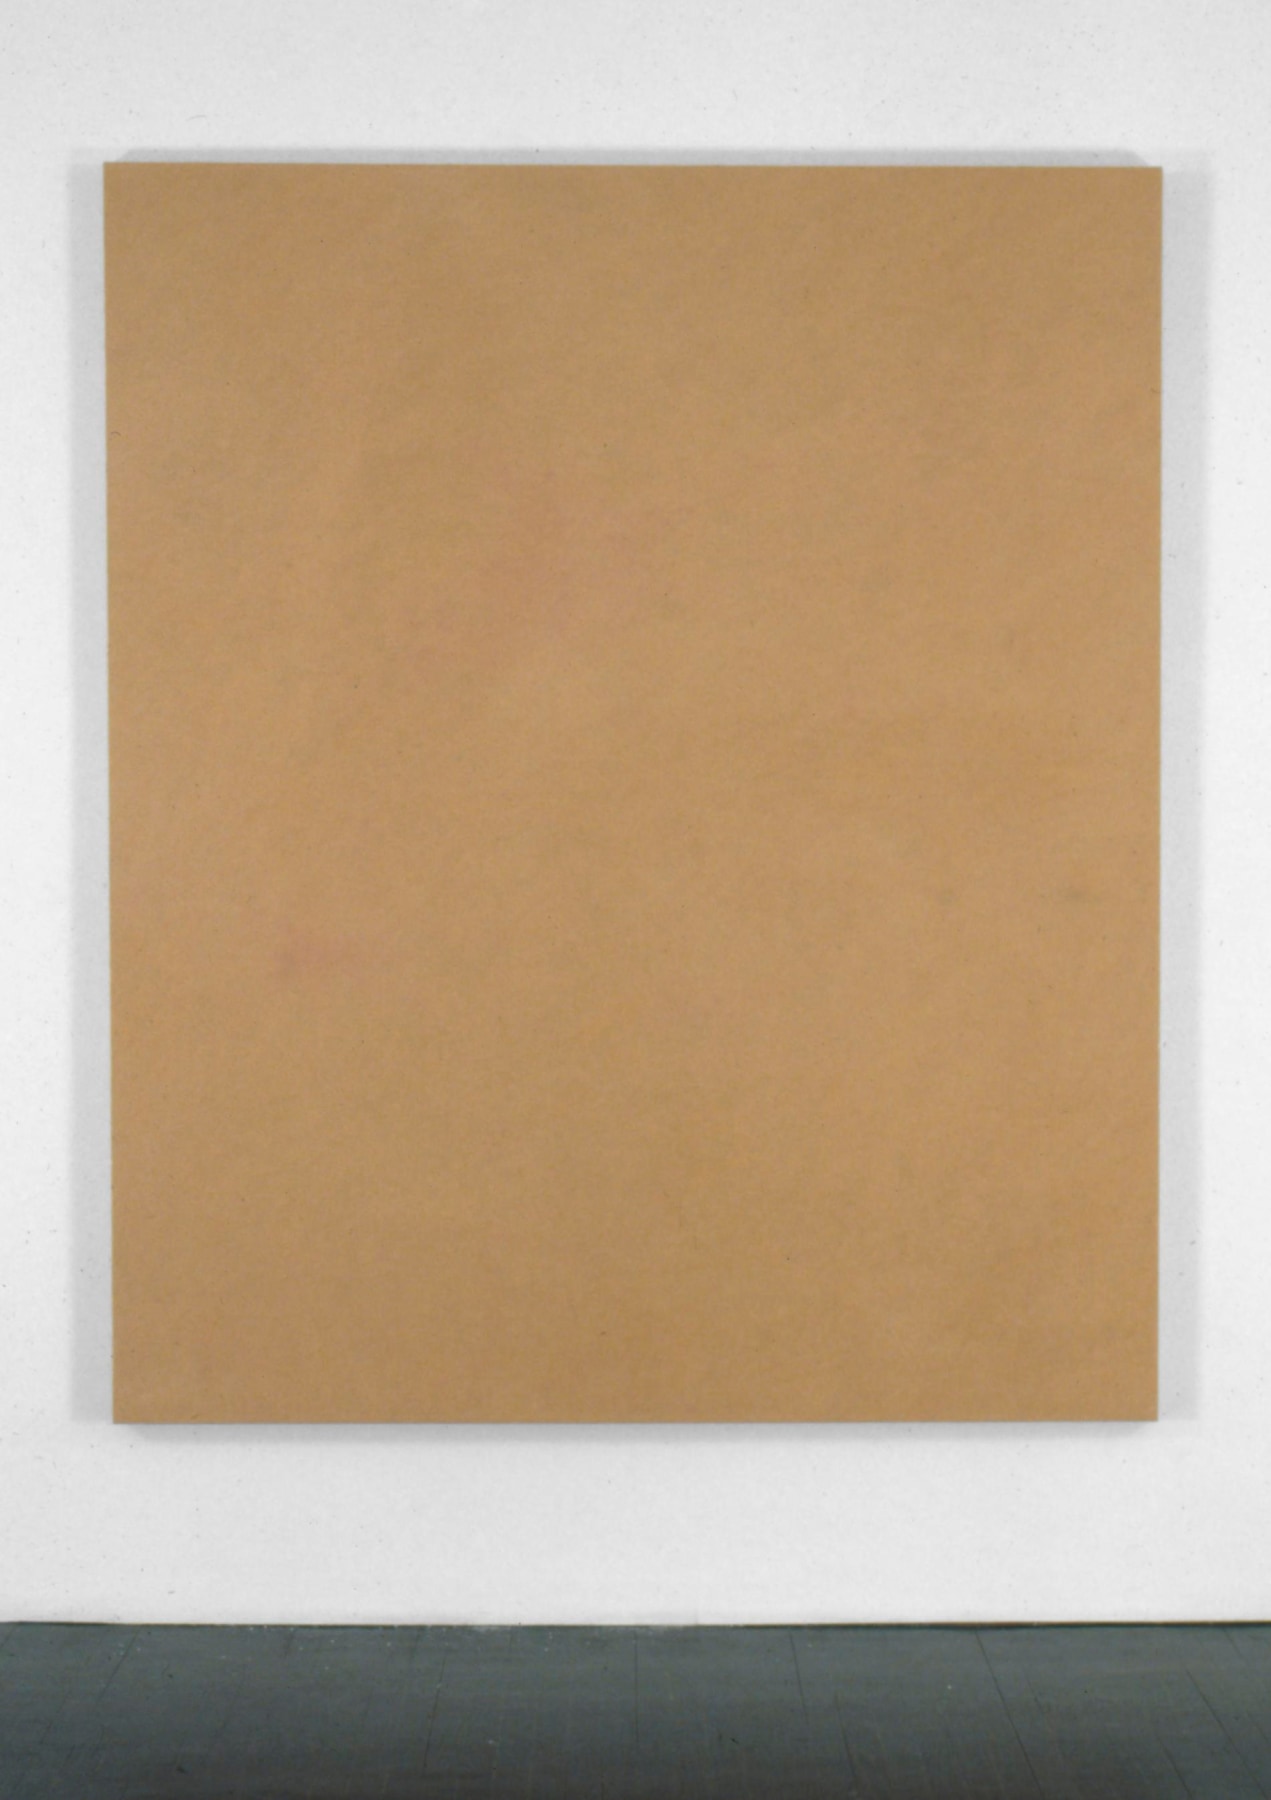 A painting of human skin color with an olive undertone